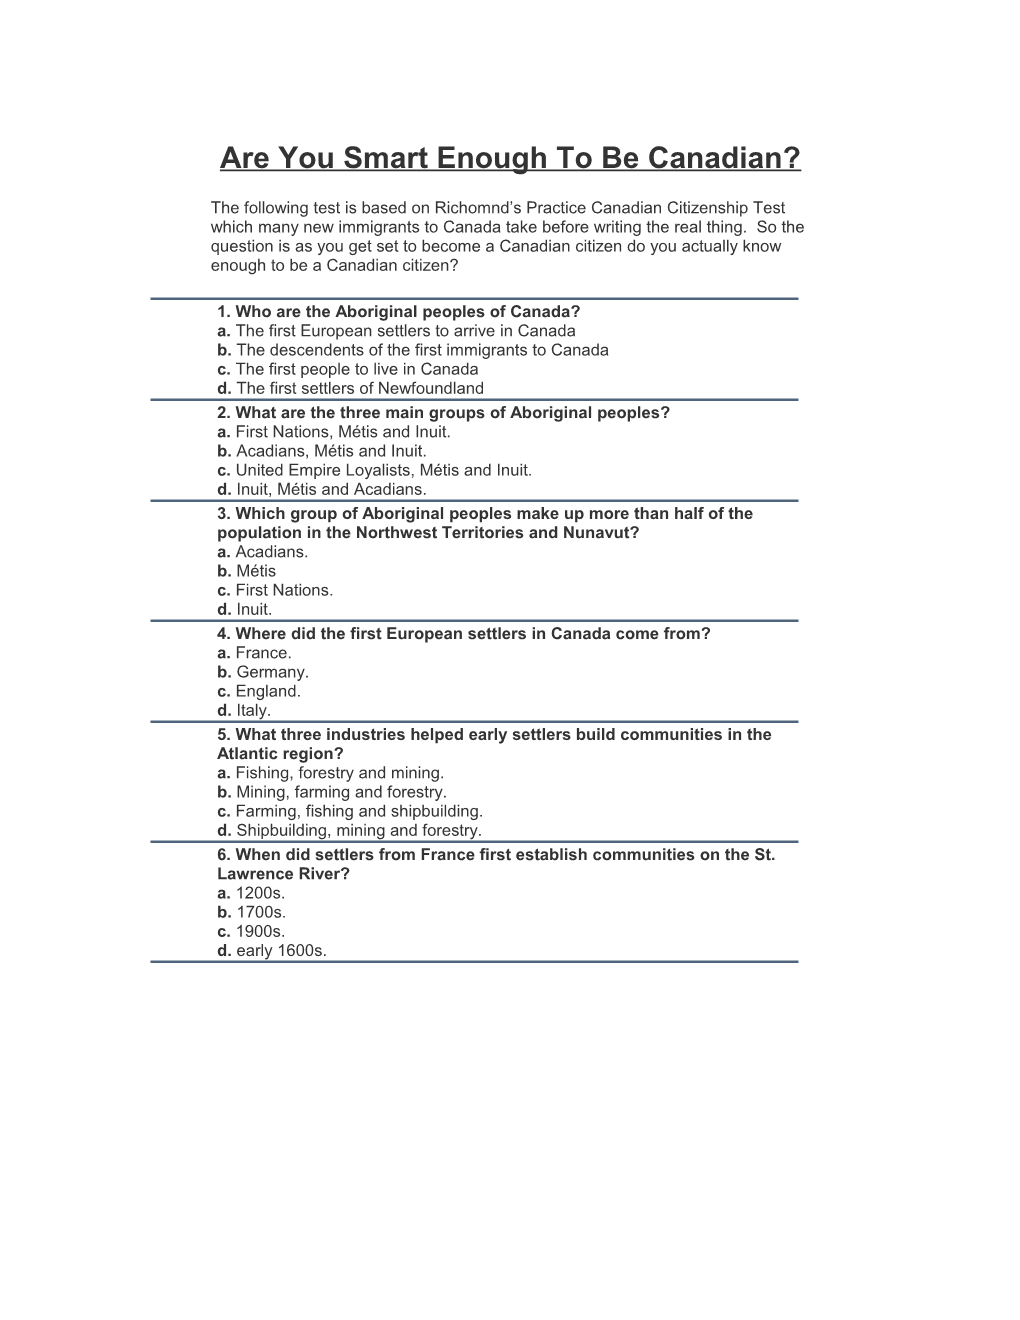 Are You Smart Enough to Be Canadian